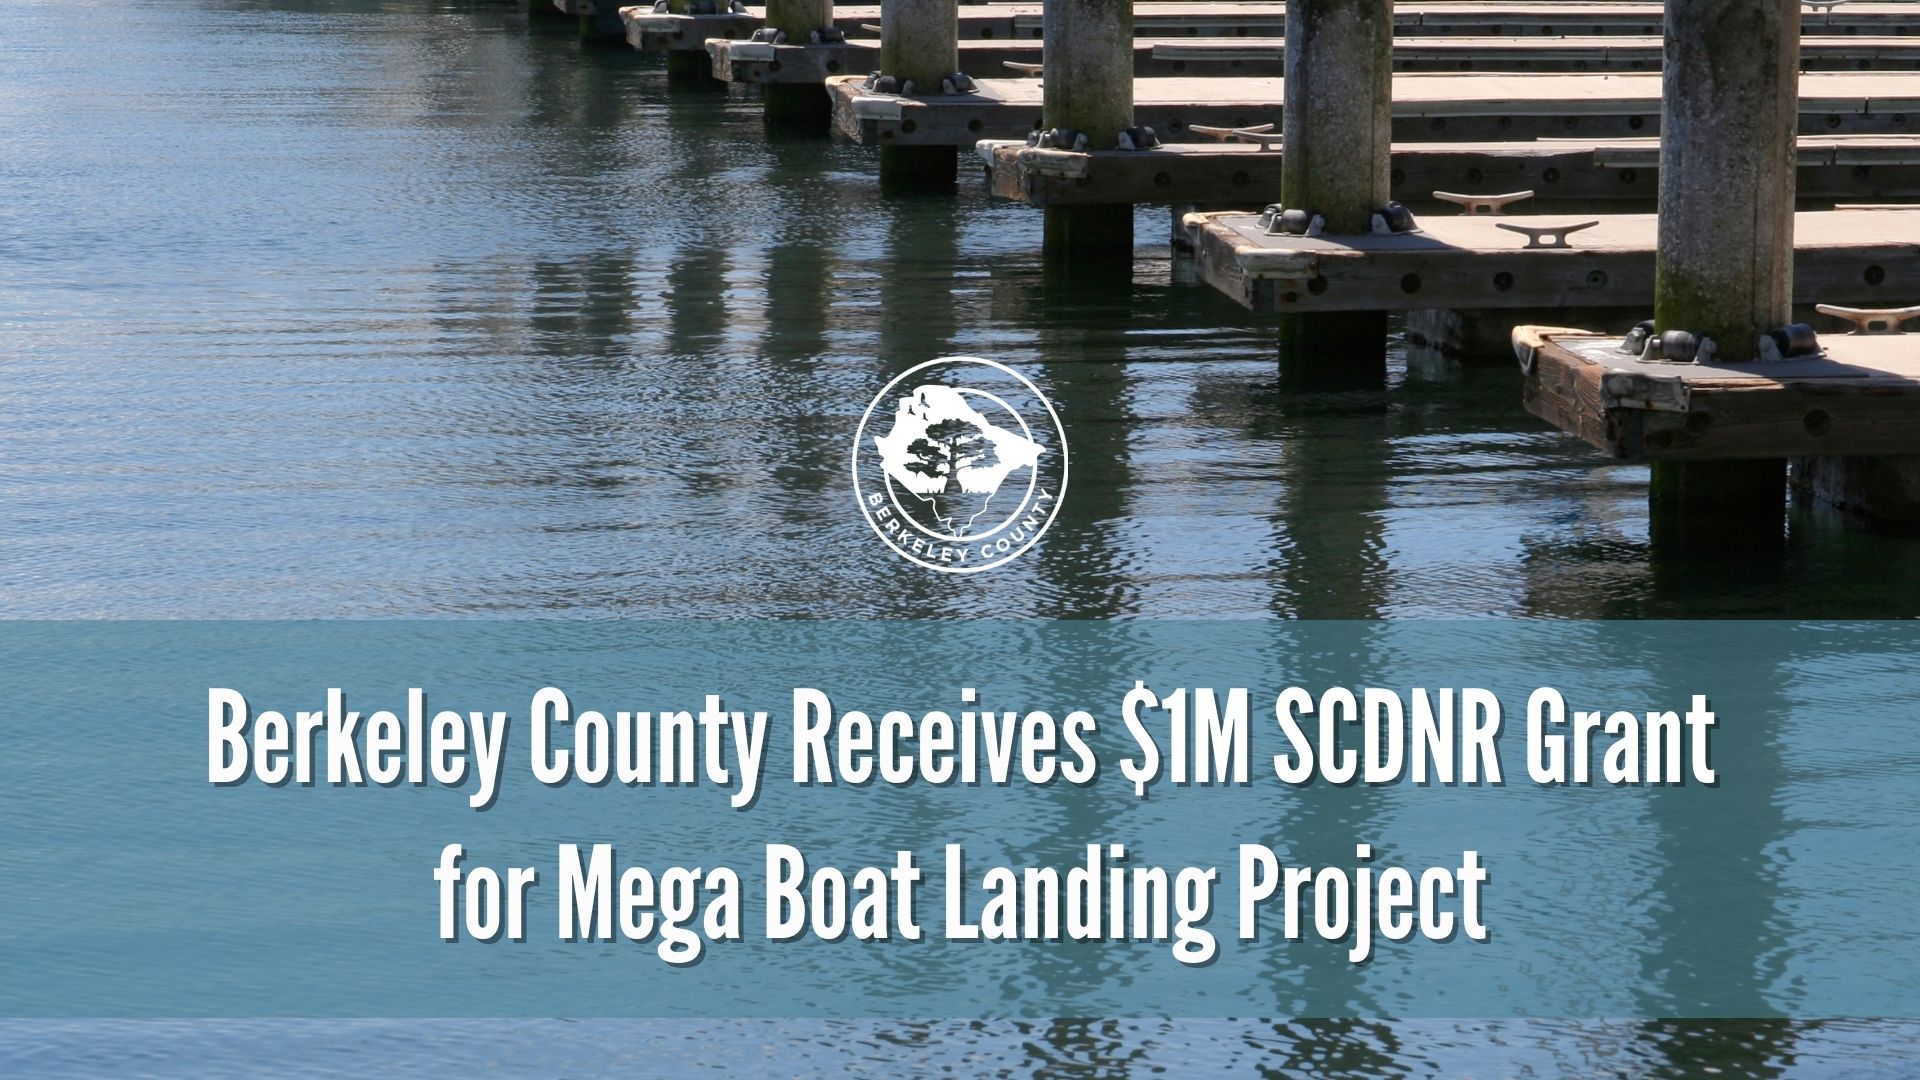 Berkeley County Receives $1M SCDNR Grant for Mega Boat Landing Project